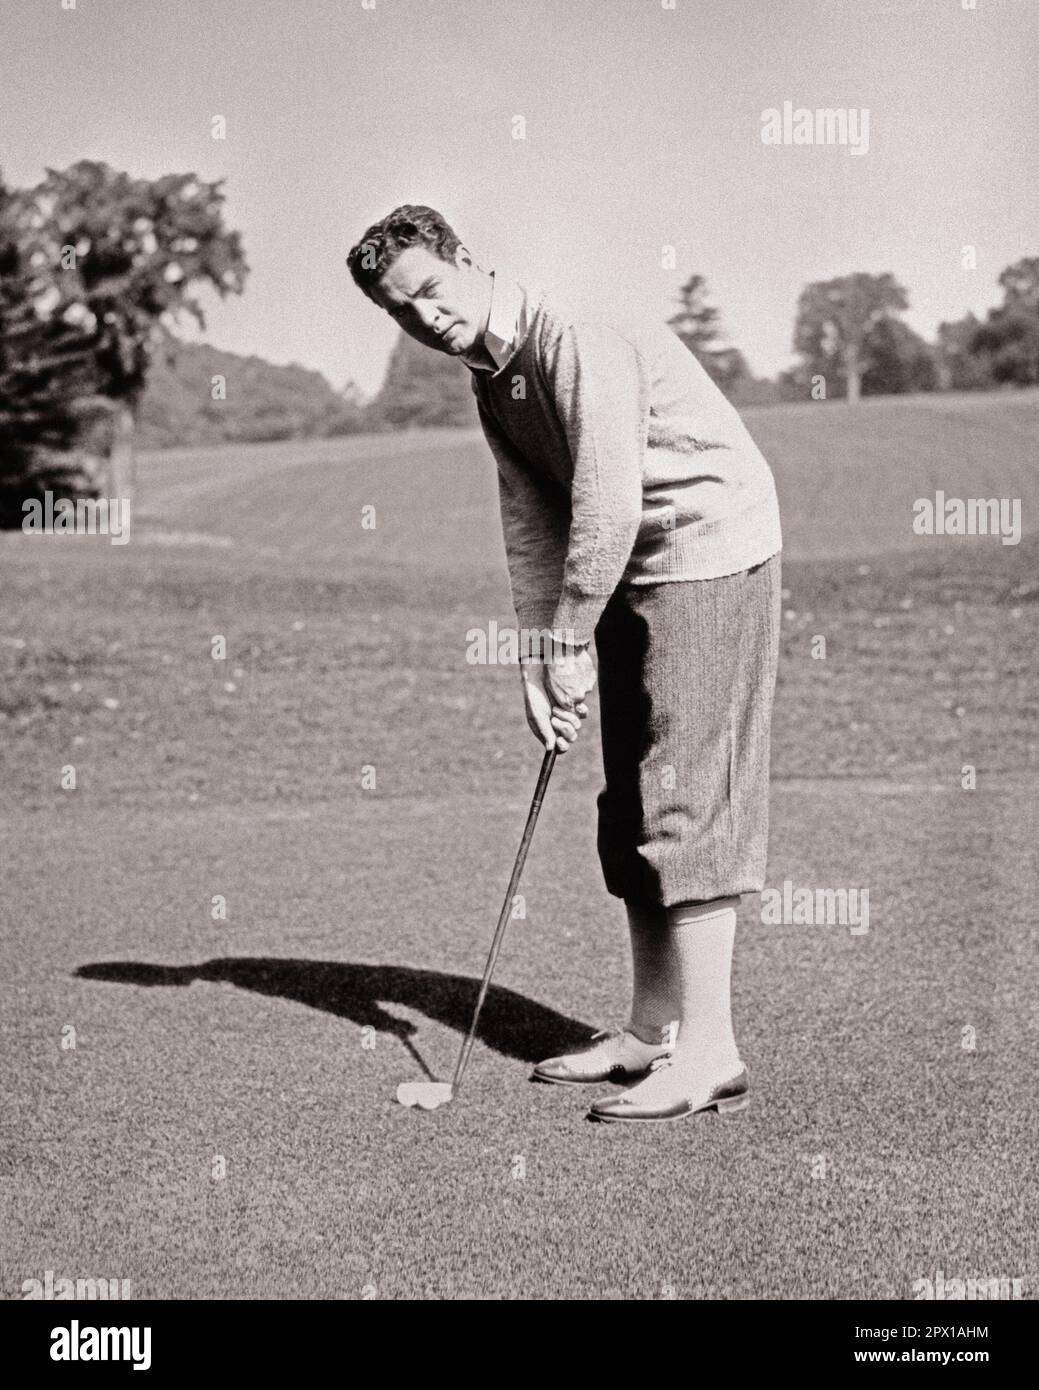 1920s MAN GOLFER ON PUTTING GREEN LOOKING AT CAMERA WEARING SWEATER PLUS FOURS AND TWO TONE SPECTATOR BROGUE STYLE GOLFING SHOES - g3644 HAR001 HARS SATISFACTION COPY SPACE FULL-LENGTH PERSONS MALES GOLFING ATHLETIC CONFIDENCE B&W EYE CONTACT ACTIVITY PHYSICAL WELLNESS ADVENTURE GOLFERS LEISURE STRENGTH STYLES AND CHOICE EXCITEMENT RECREATION HANDSOME ON CONNECTION FLEXIBILITY LINKS MUSCLES SPECTATOR STYLISH PLUS FOURS TWO-TONE FASHIONS FOCUSED MID-ADULT MID-ADULT MAN PRECISION YOUNG ADULT MAN BLACK AND WHITE CAUCASIAN ETHNICITY CONCENTRATING HAR001 OLD FASHIONED Stock Photo